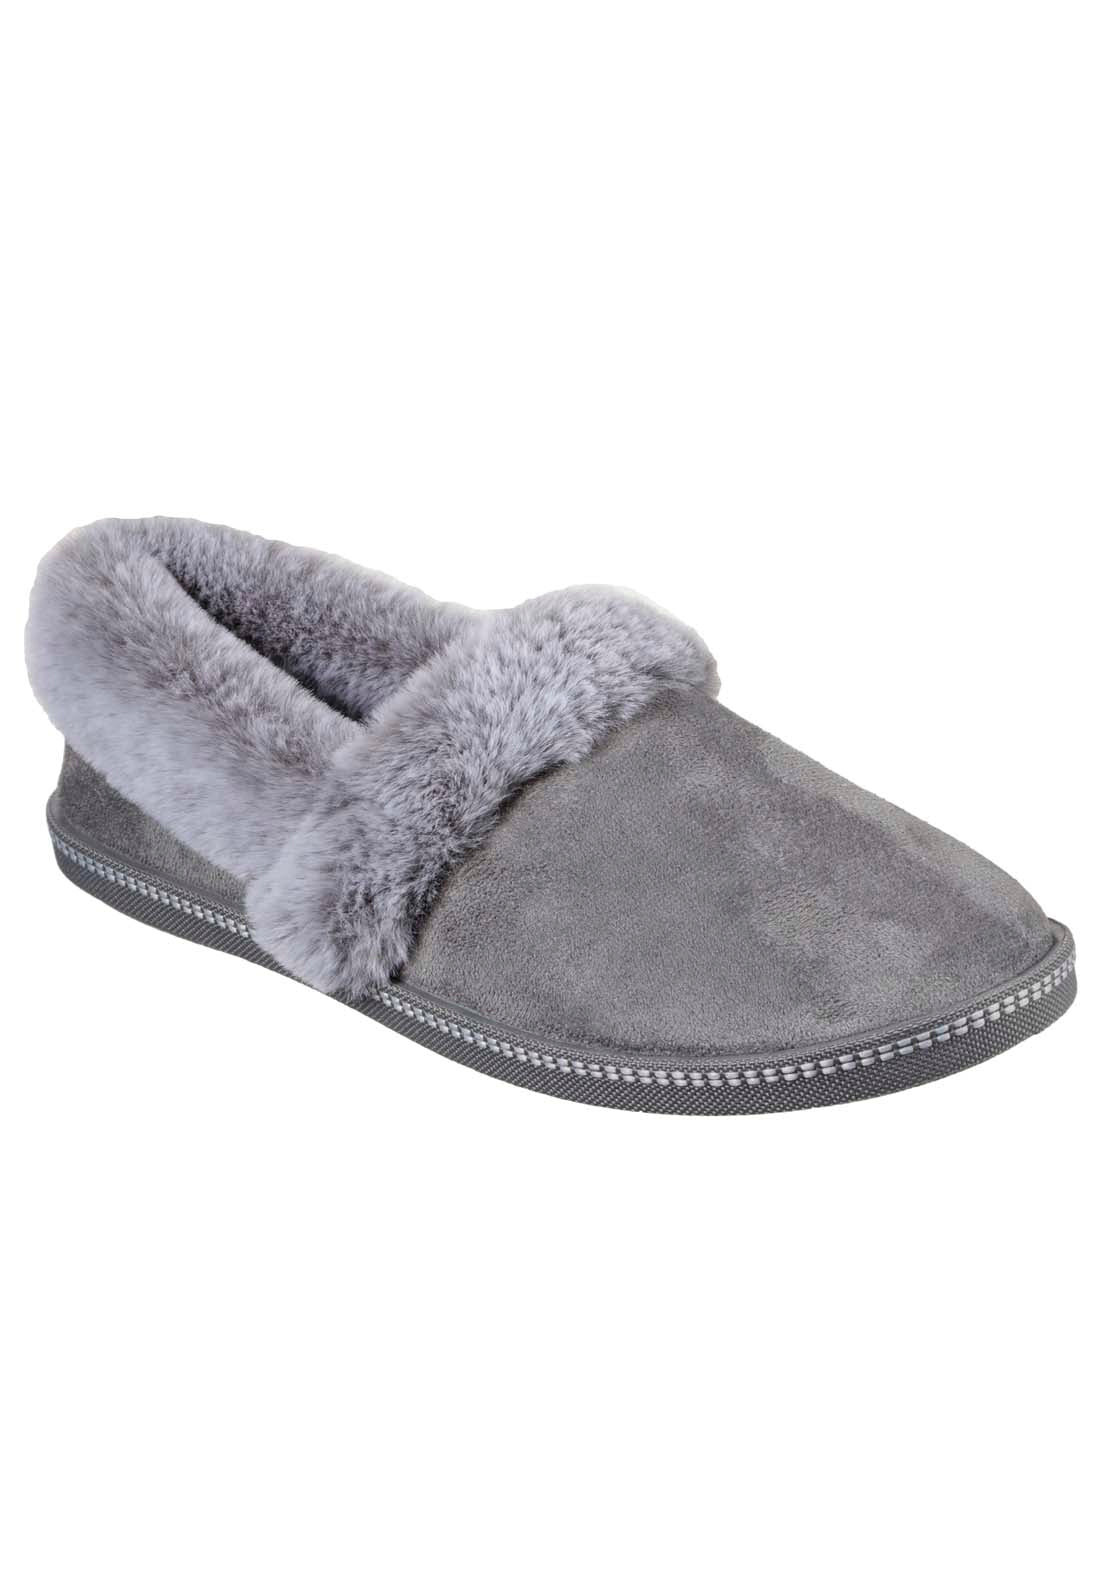 Skechers Cosy Campfire Slipper - Grey 1 Shaws Department Stores